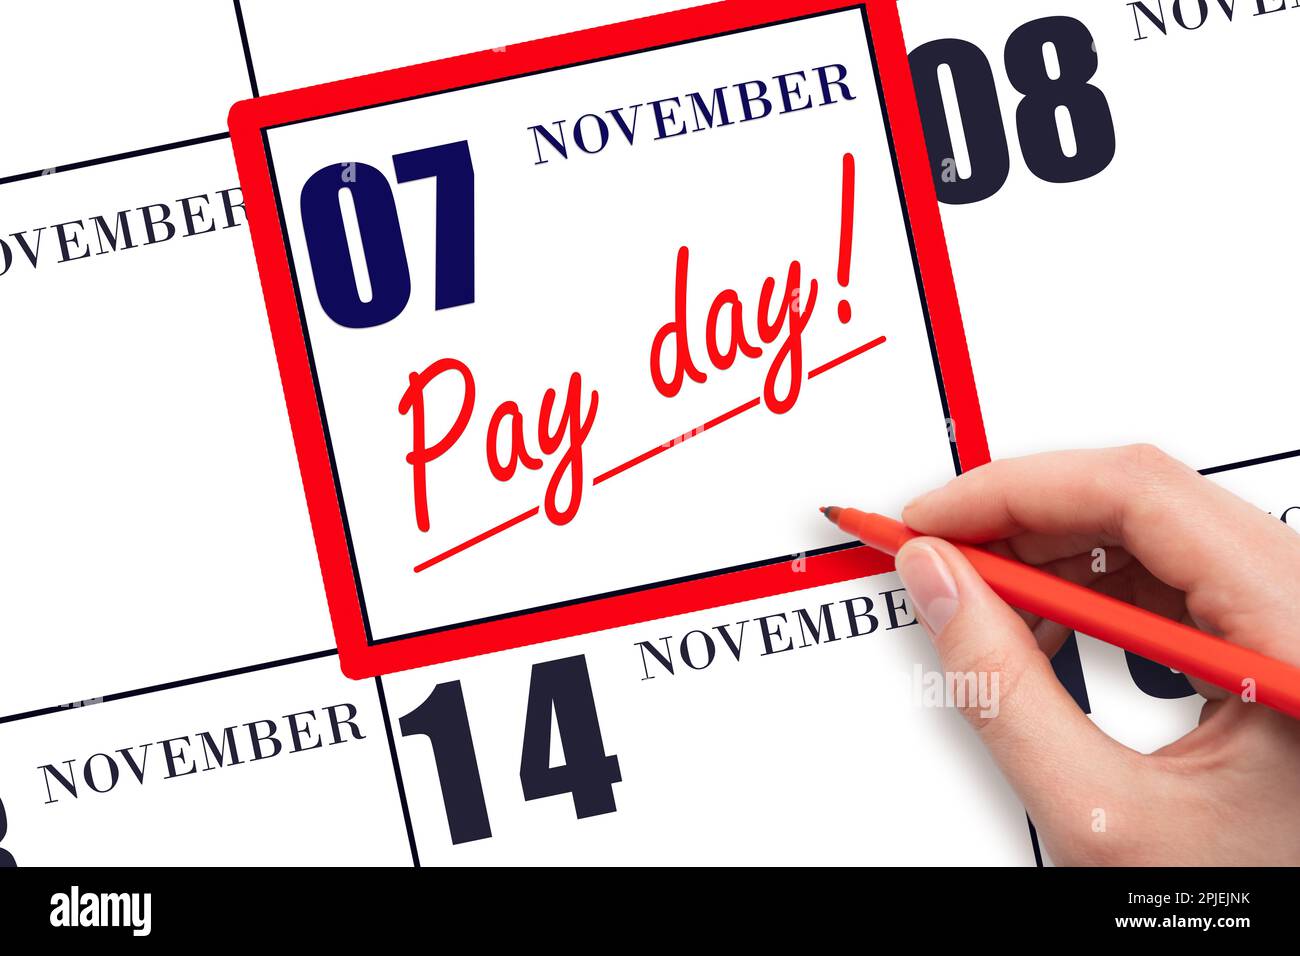 7th day of November. Hand writing text PAY DATE on calendar date November 7 and underline it. Payment due date. Reminder concept of payment. Autumn mo Stock Photo